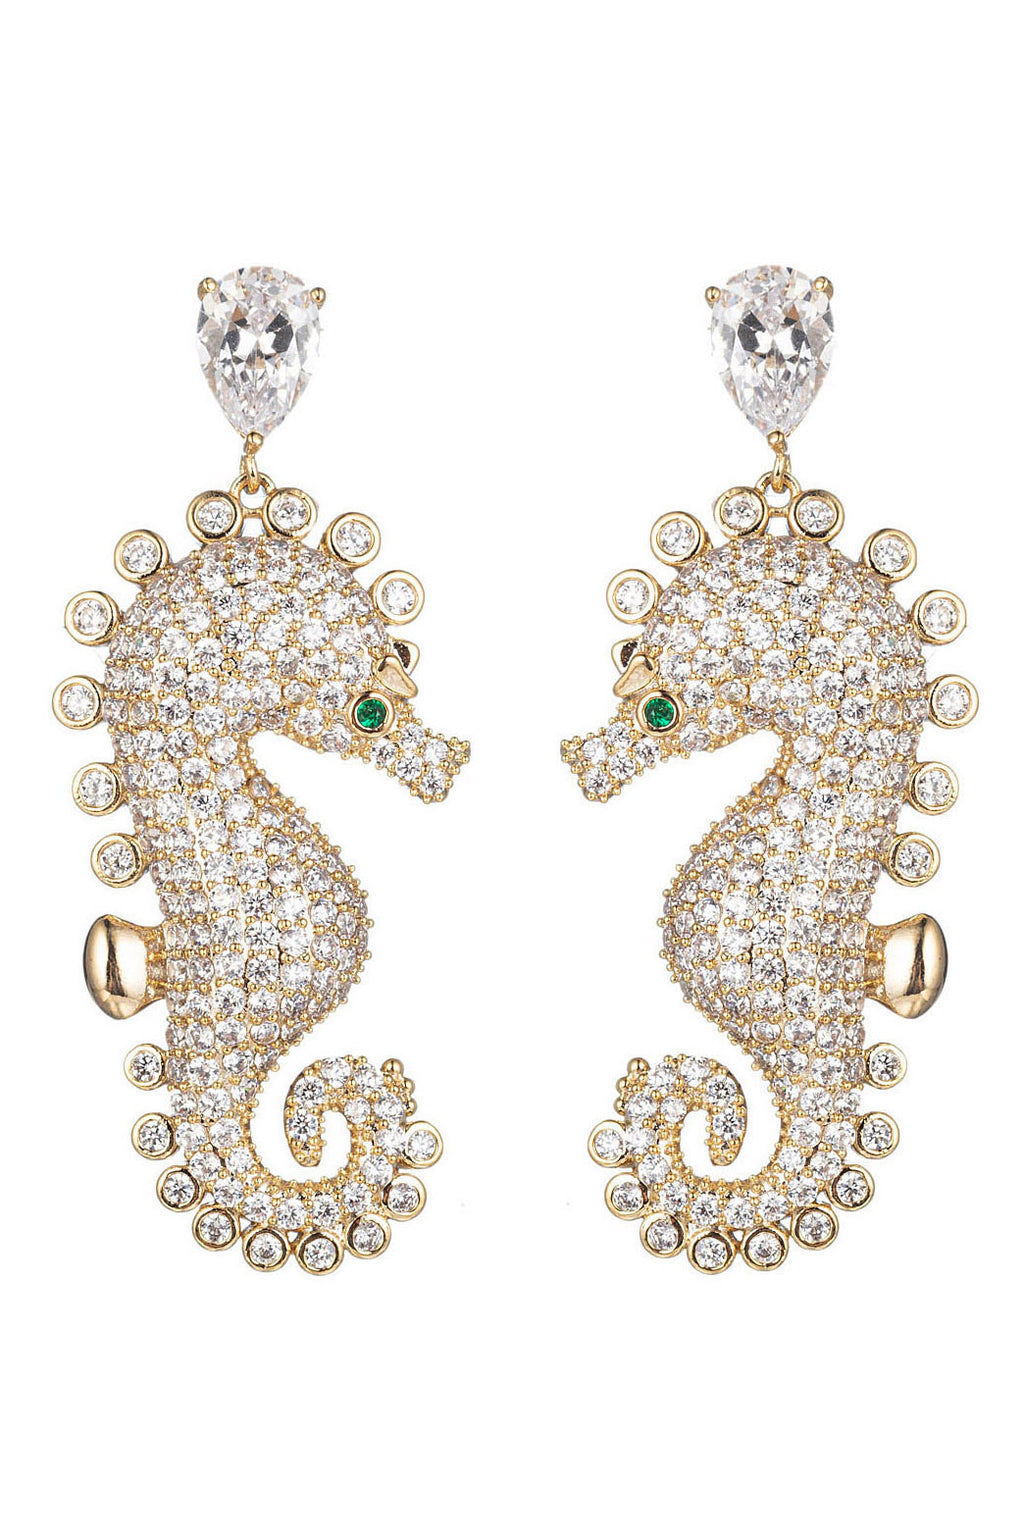 Gold brass seahorse pendant earrings studded with CZ crystals.